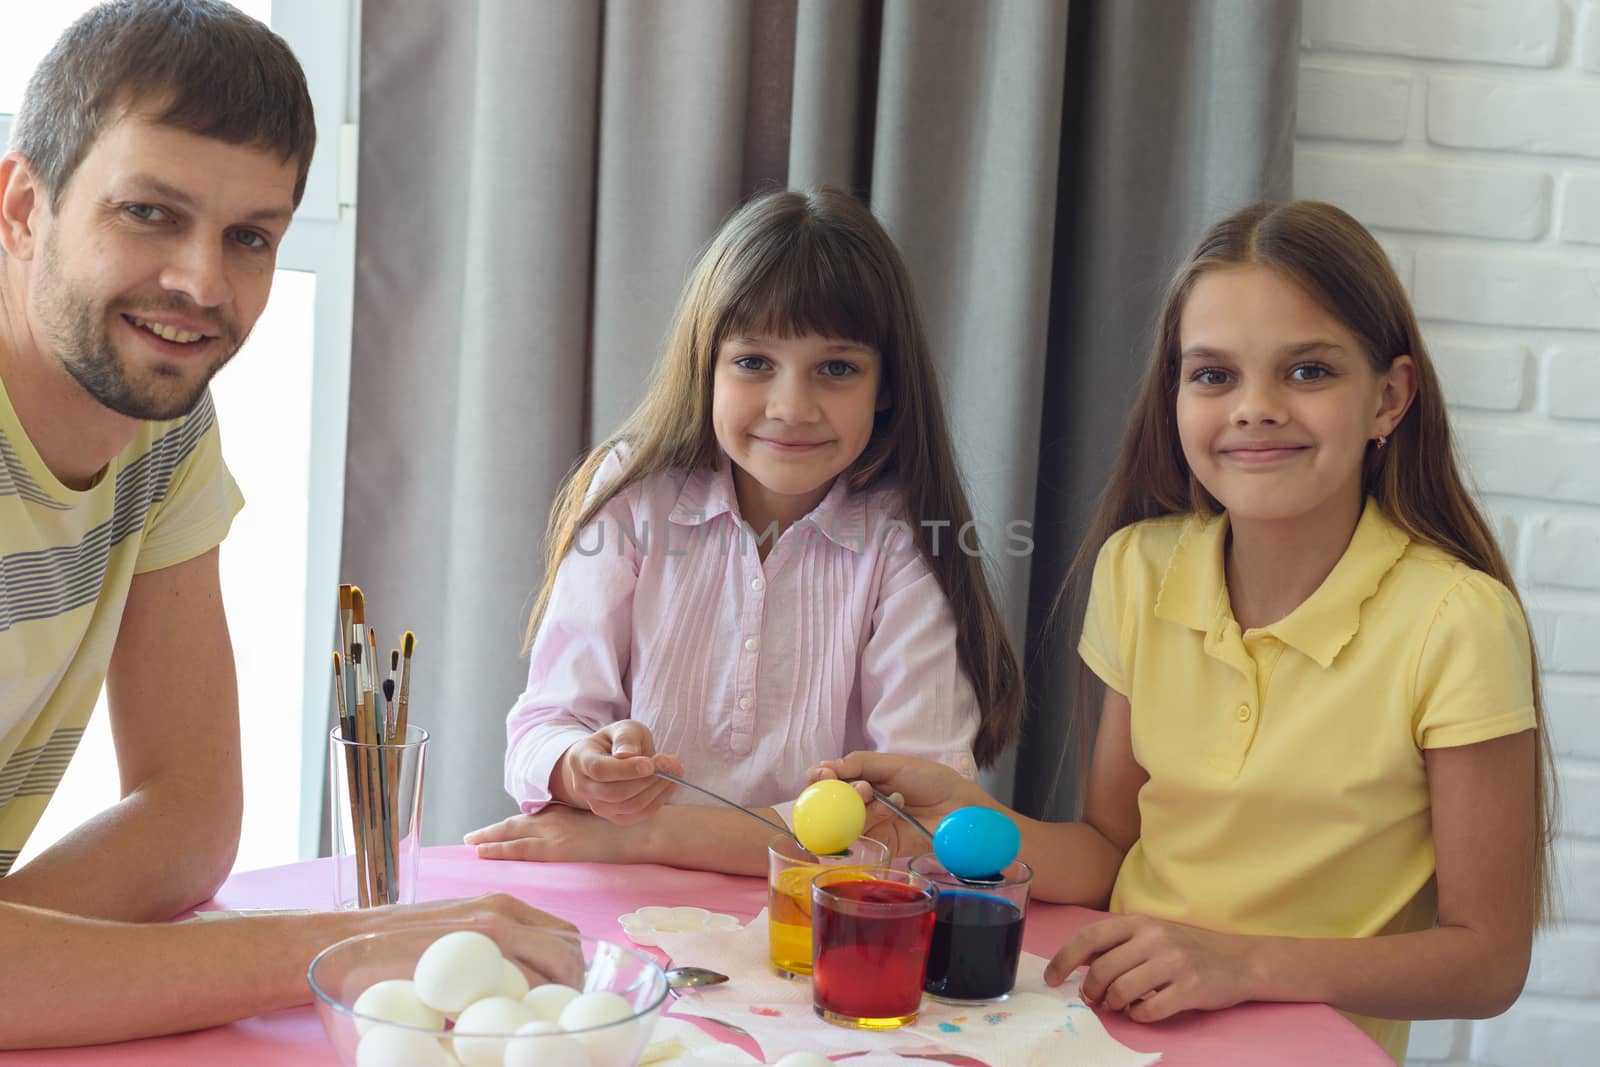 The children, together with dad, painted the first Easter eggs and looked joyfully into the frame by Madhourse